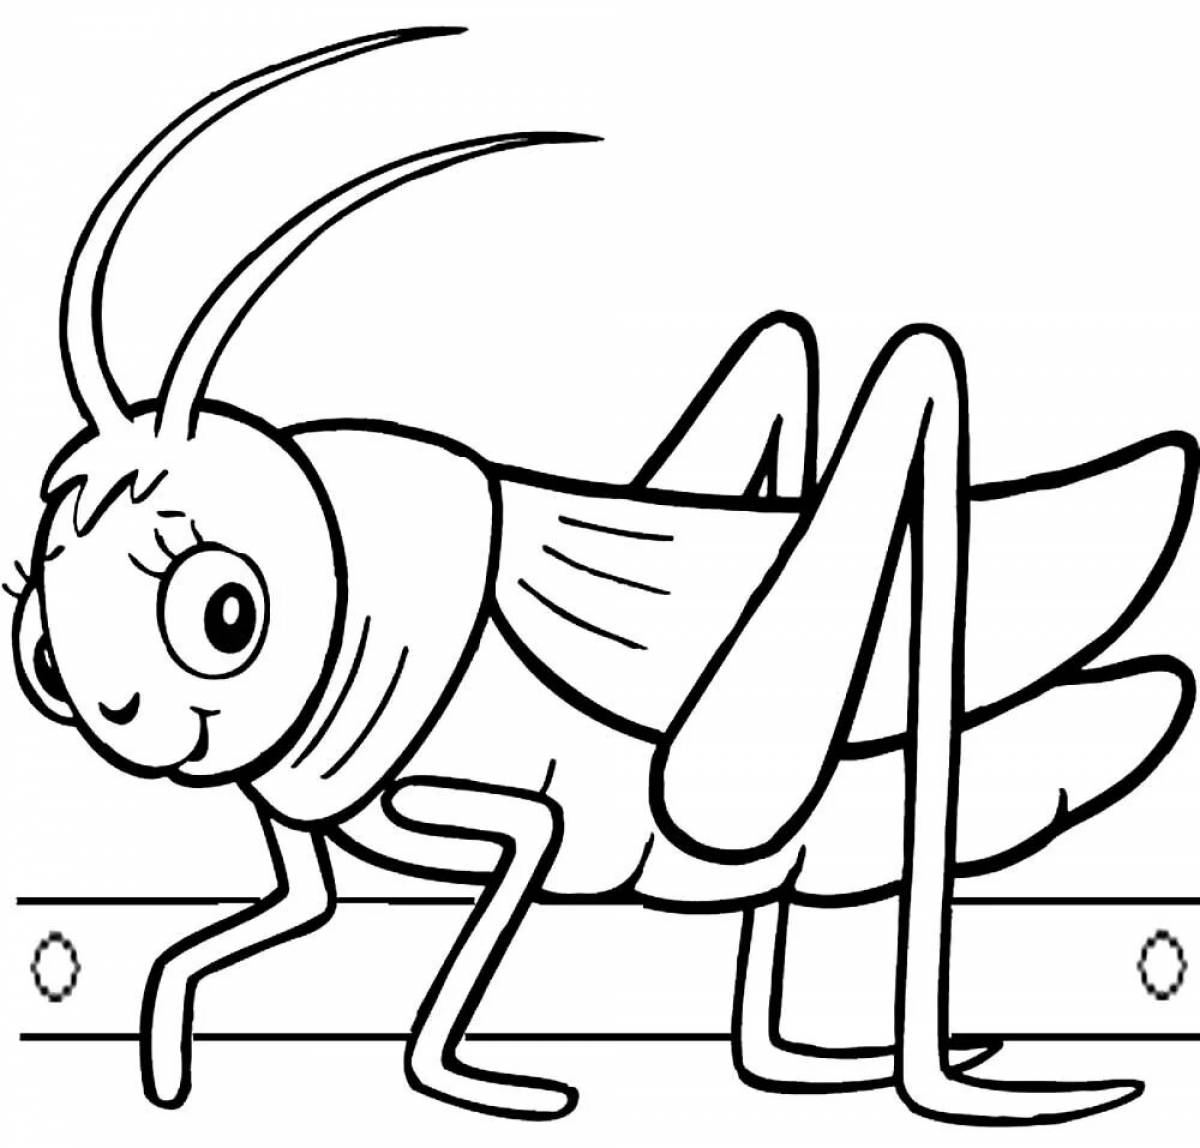 Colored bright cricket coloring page